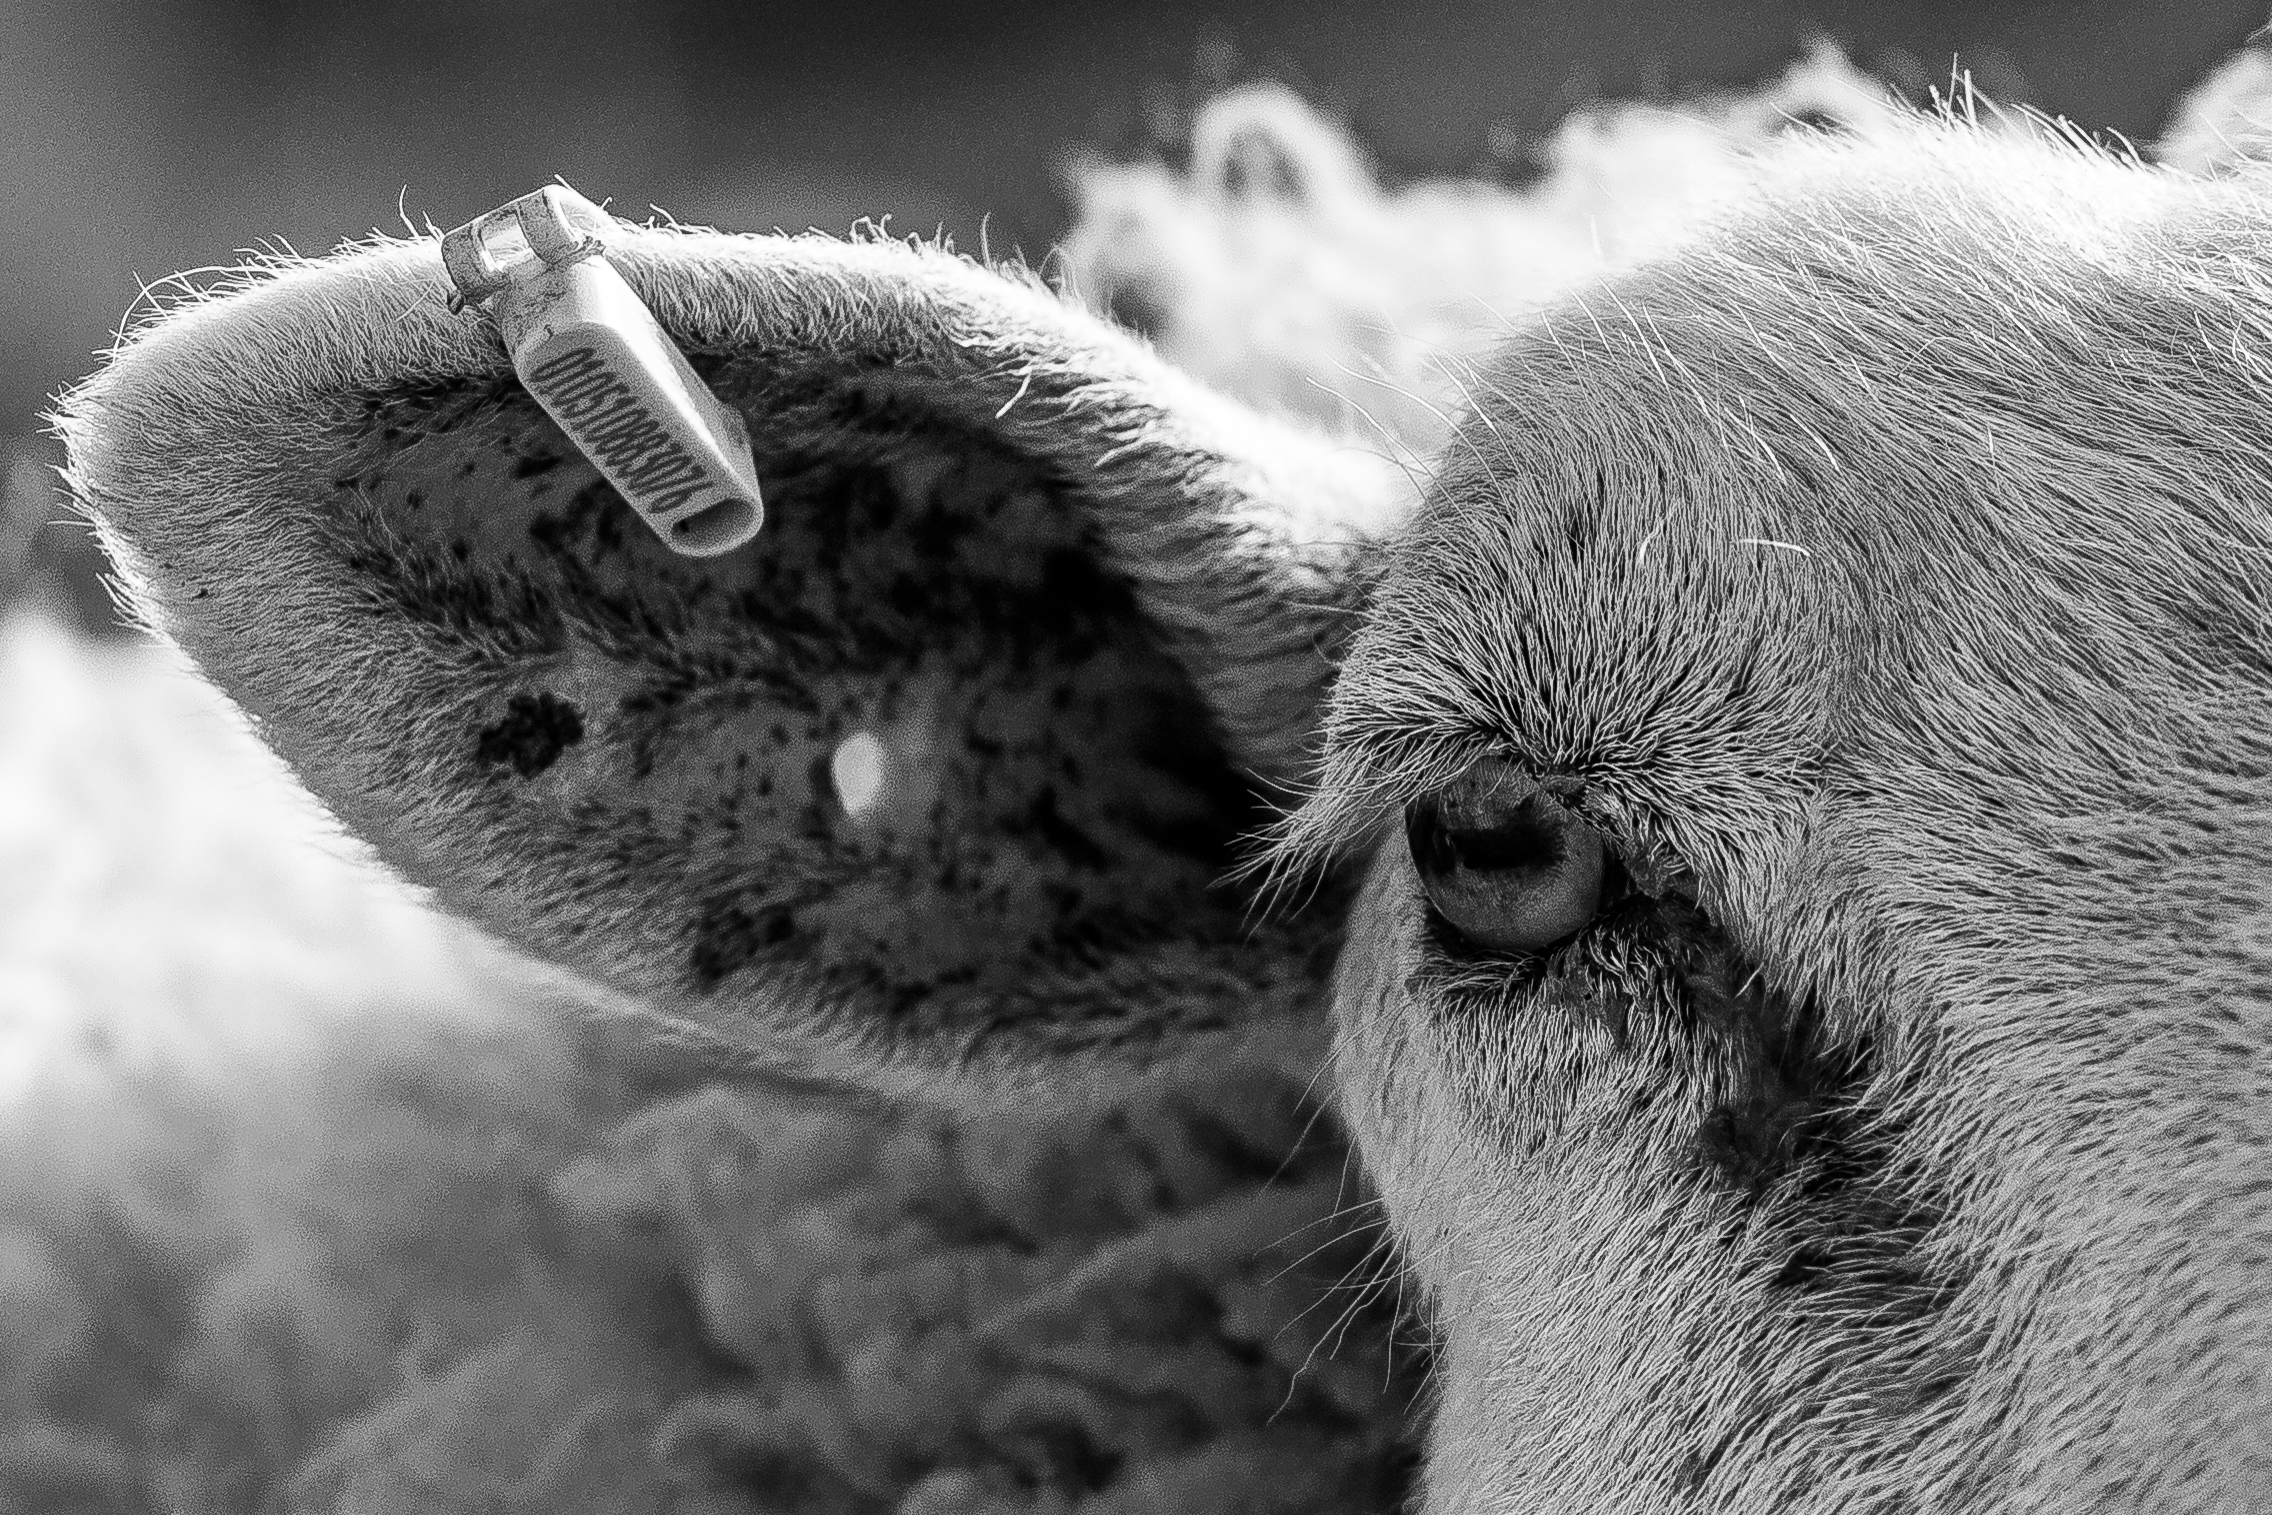 Black-and-white close-up of a sheep's right eye and tagged ear.